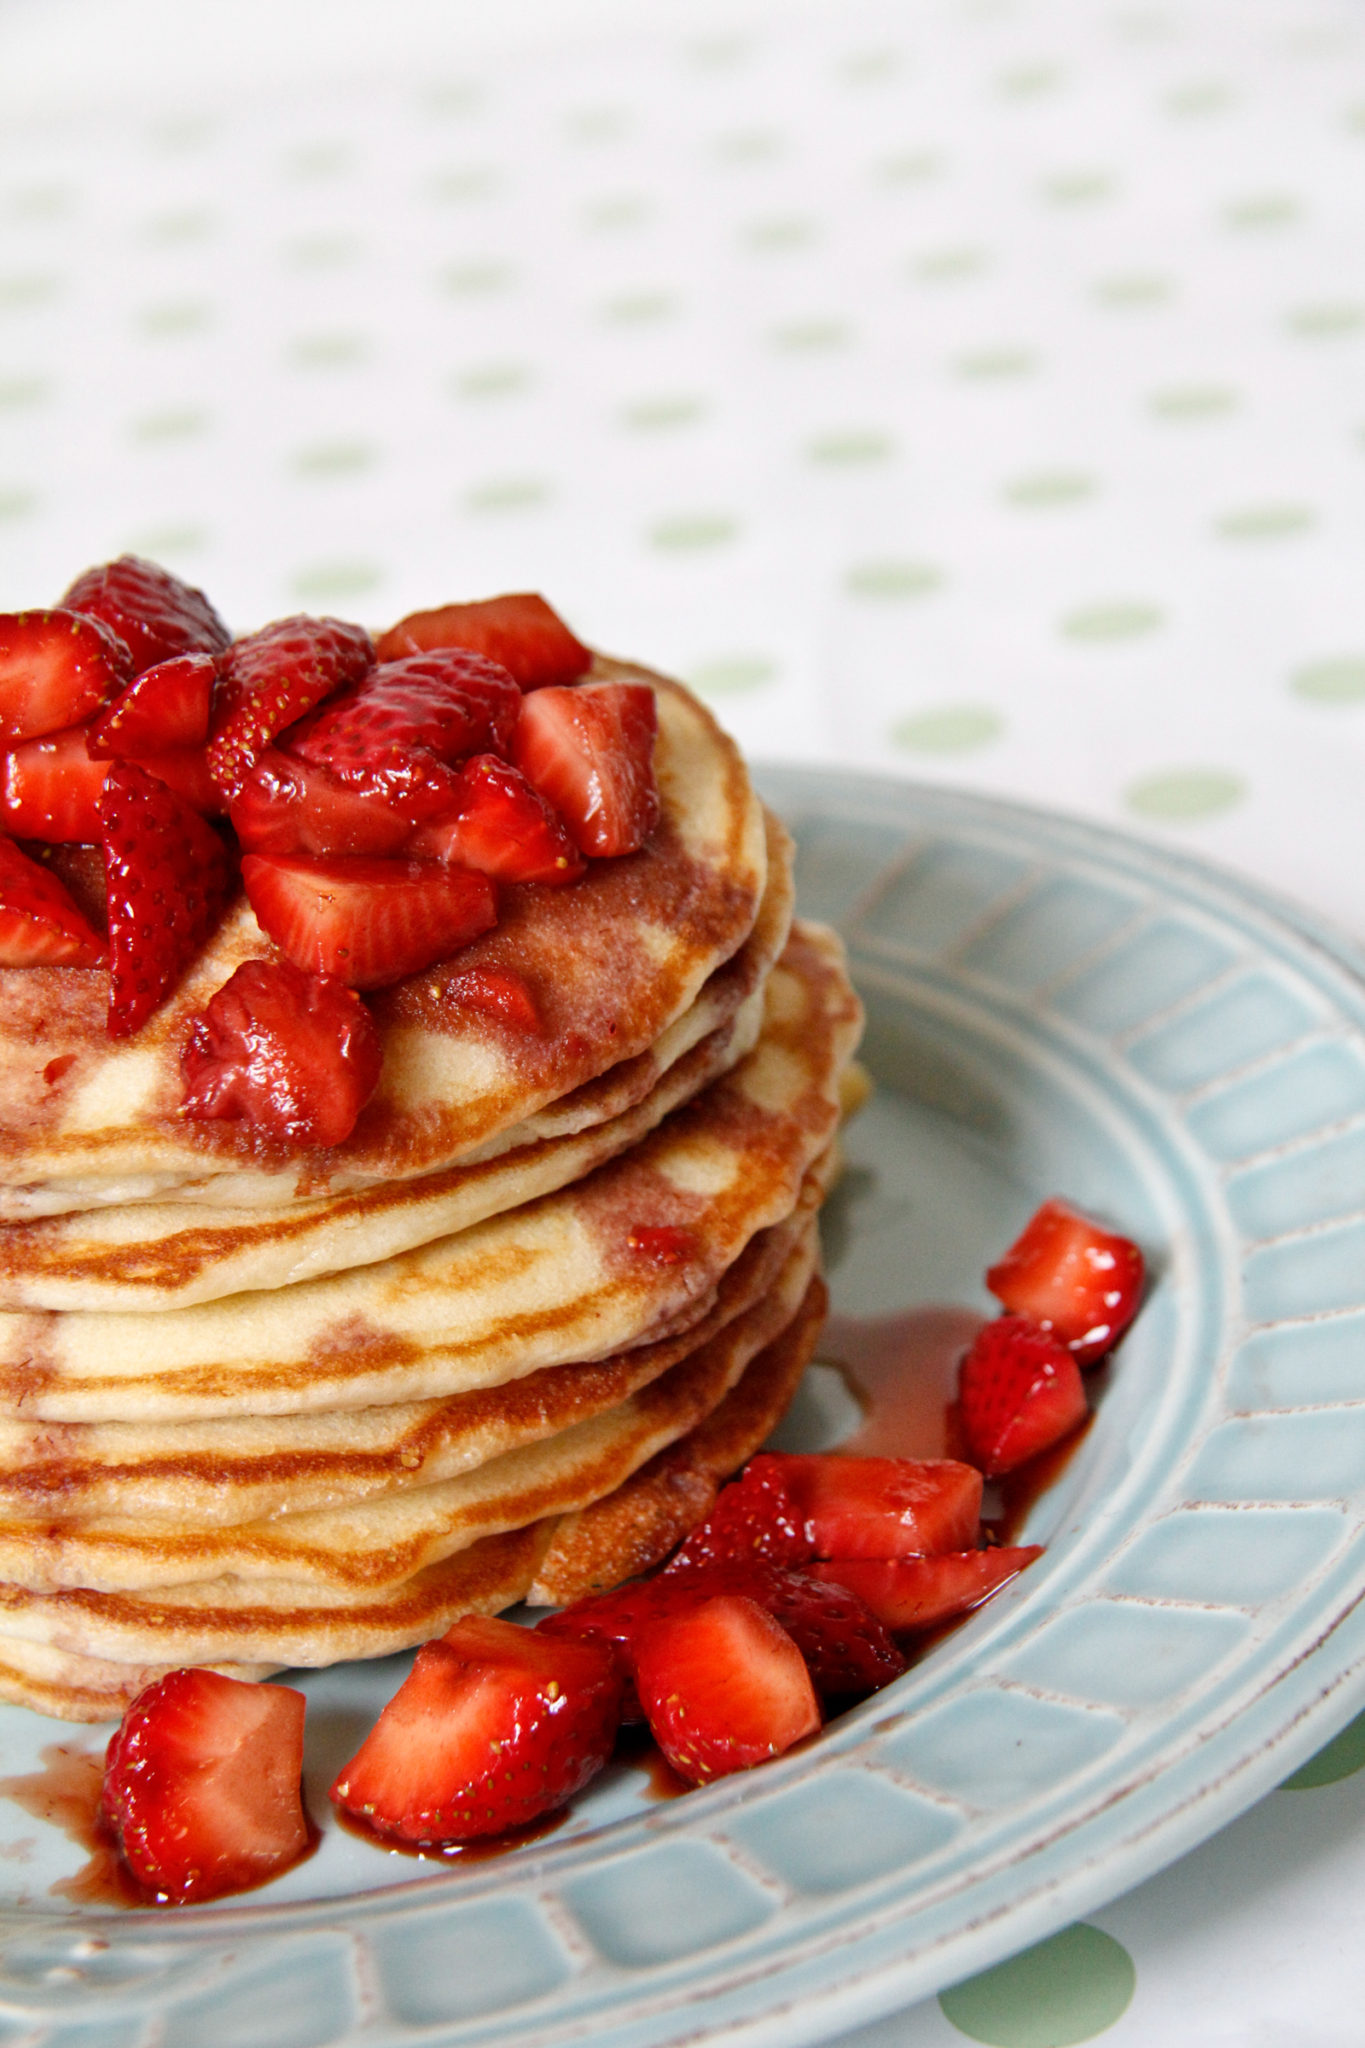 Pancakes with Balsamic Strawberries | Chef Julie Yoon